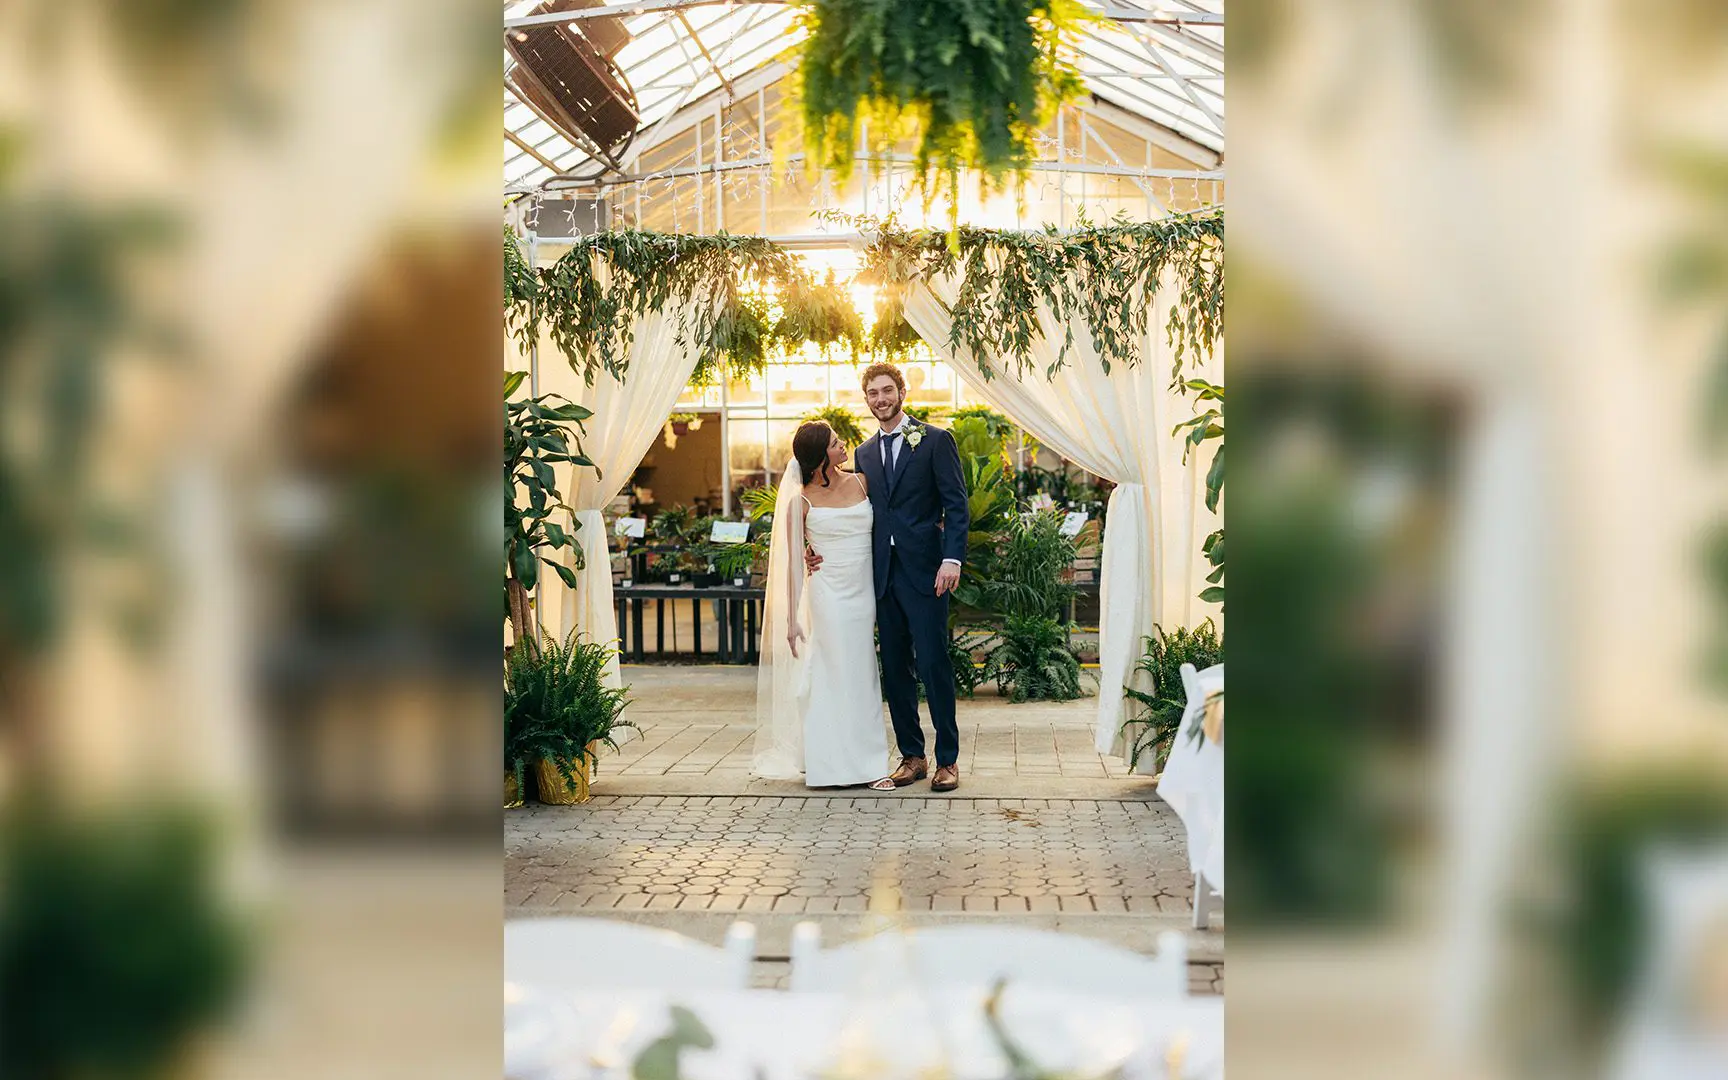 A couple smiling together at a wedding venue decorated with hanging plants and white drapery, seen through a blurred floral archway.